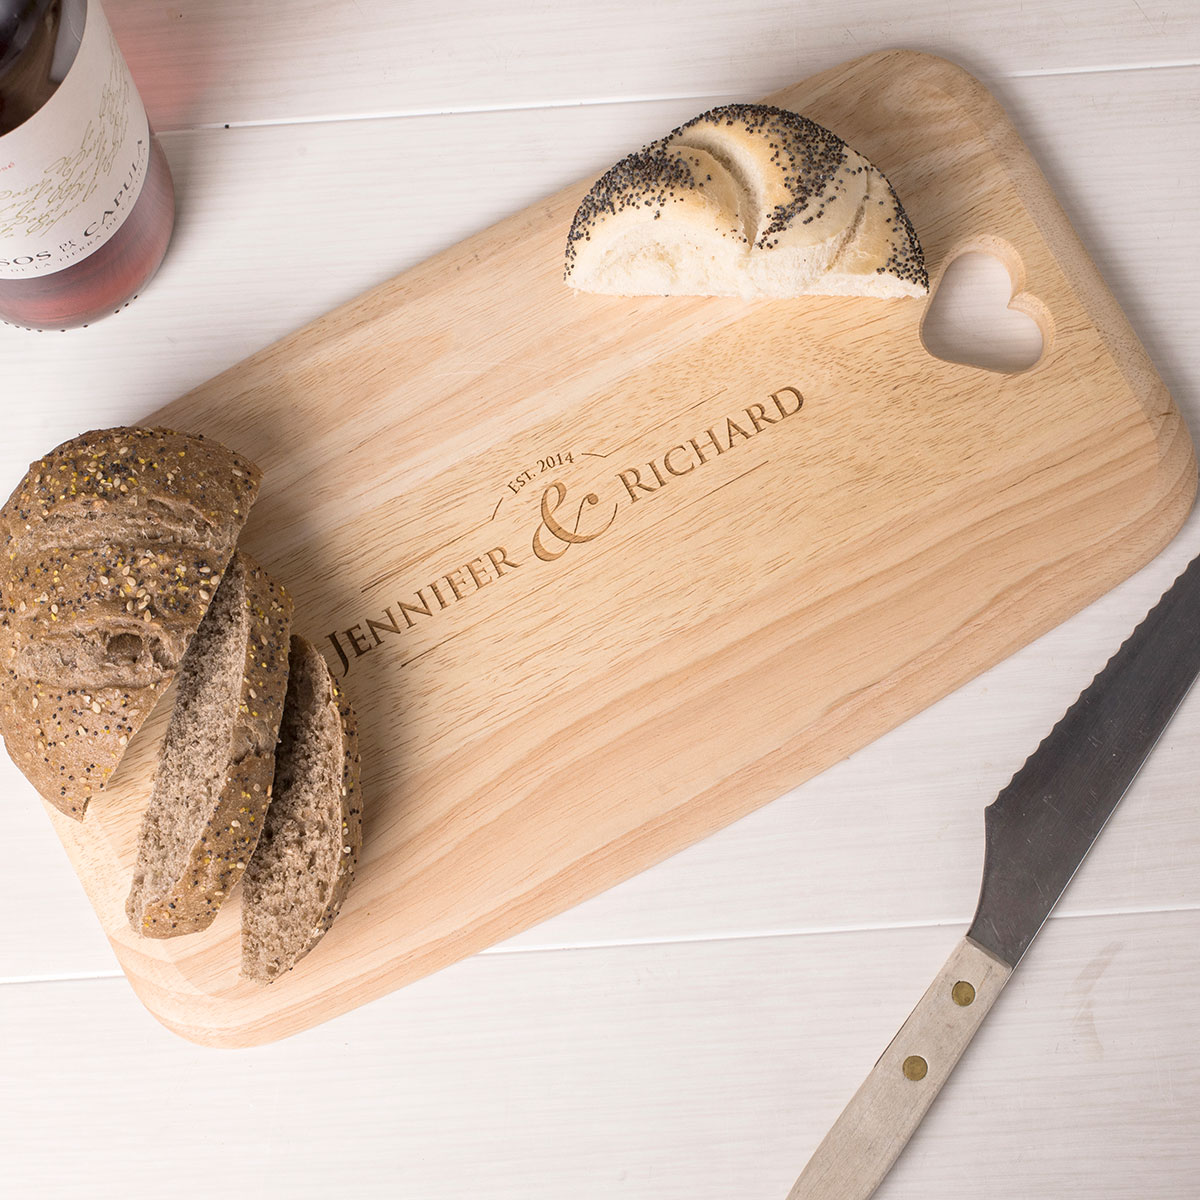 Personalised Engraved Wooden Heart Large Chopping Board